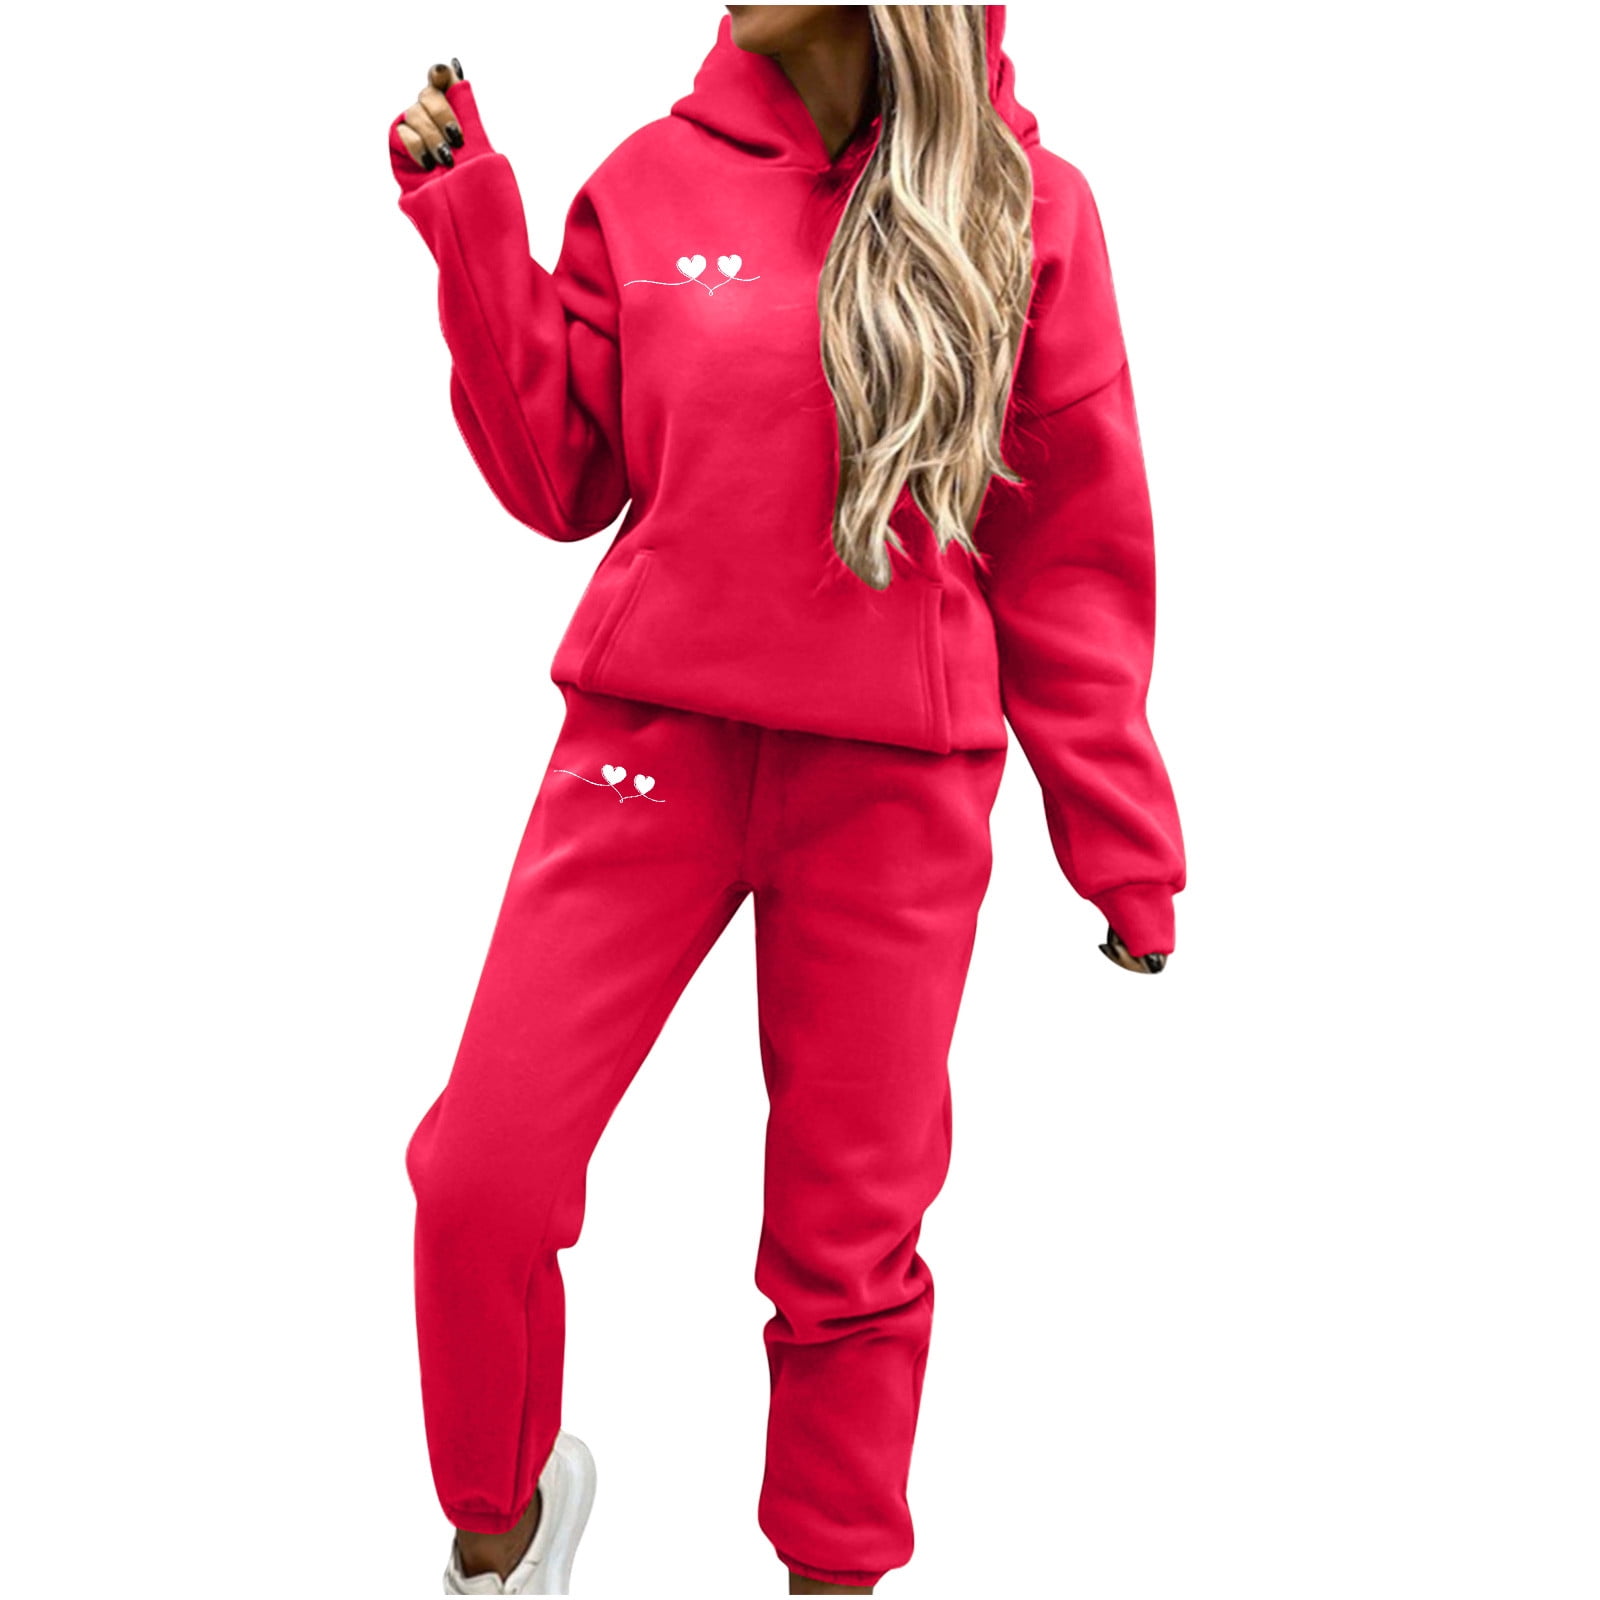 RQYYD Two Piece Outfits for Women Valentine's Day Heart Graphic Tracksuit  Set Casual Loose Sweatshirt Hoodie Sweatpants Hooded Sweatsuit Red XL 